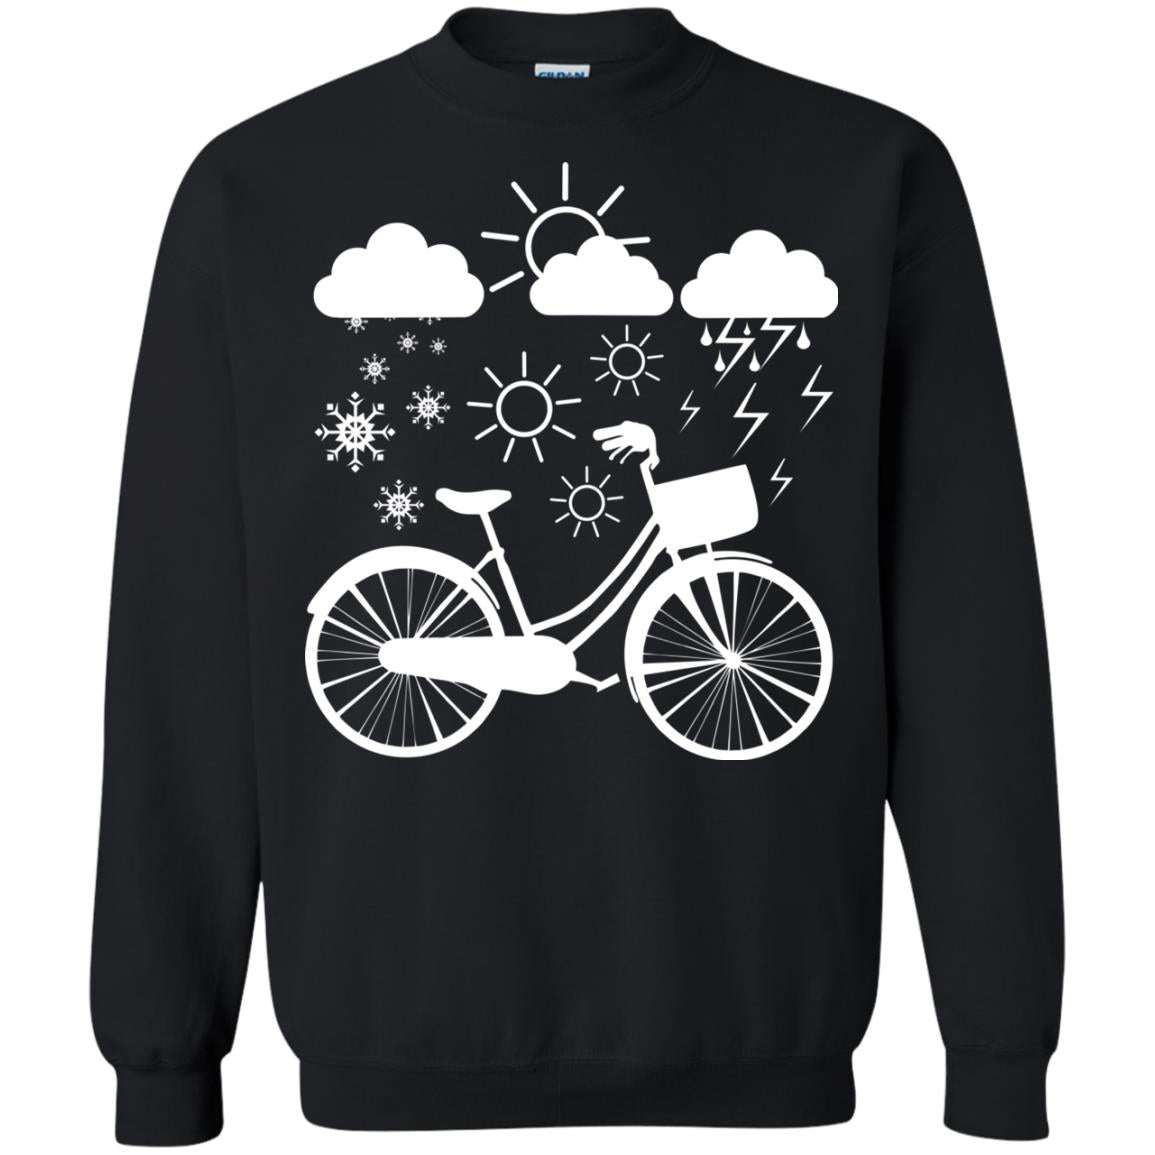 Bicycle All Weather Cyclist T-shirt For Bicycle Lover